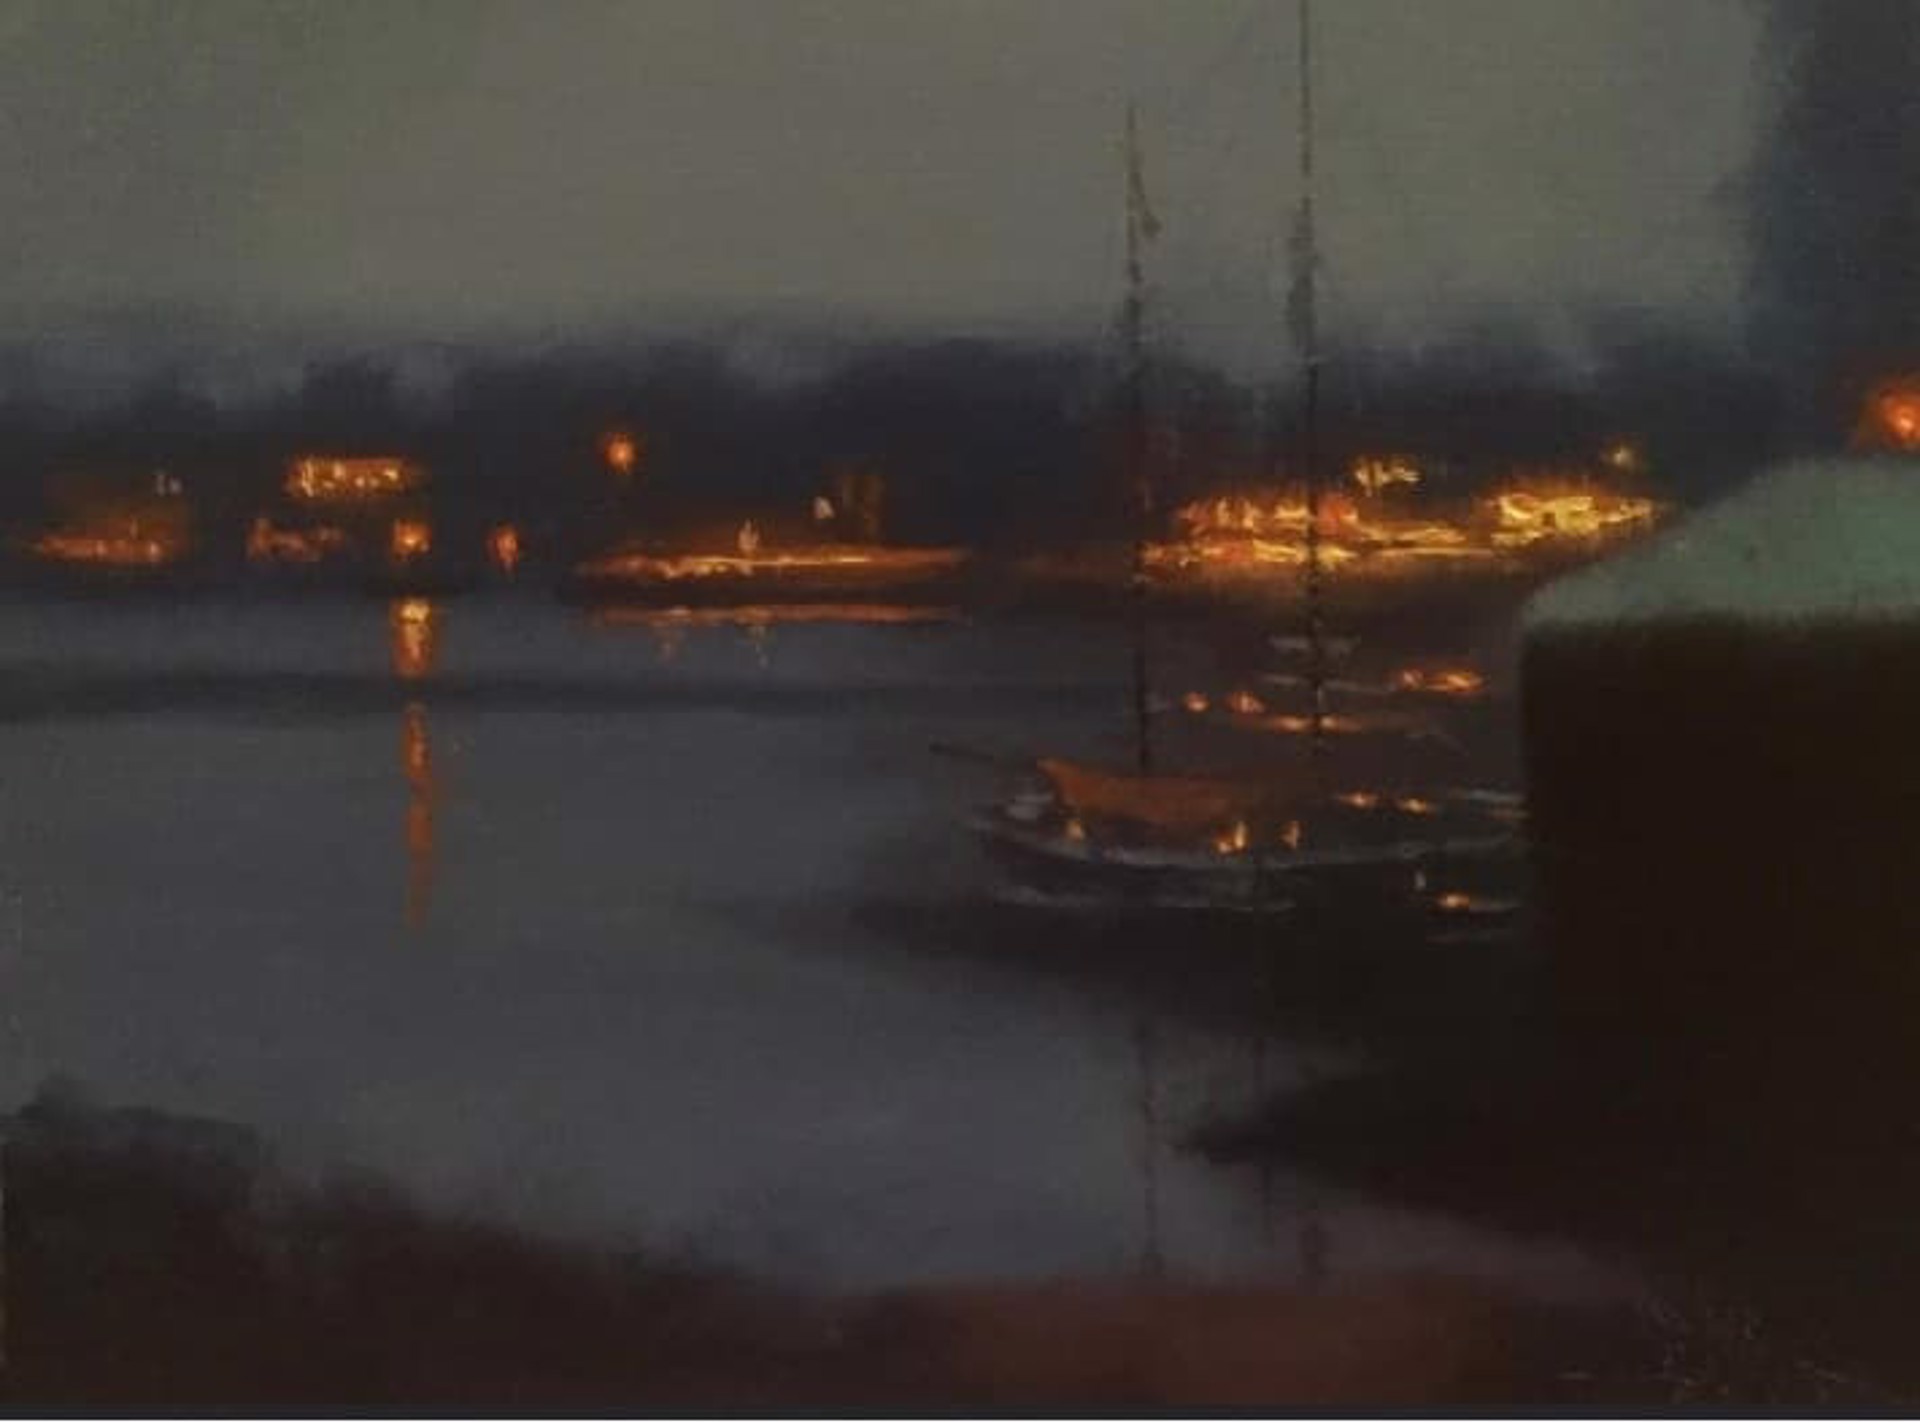 Evening in Camden Harbor by C.W. Mundy